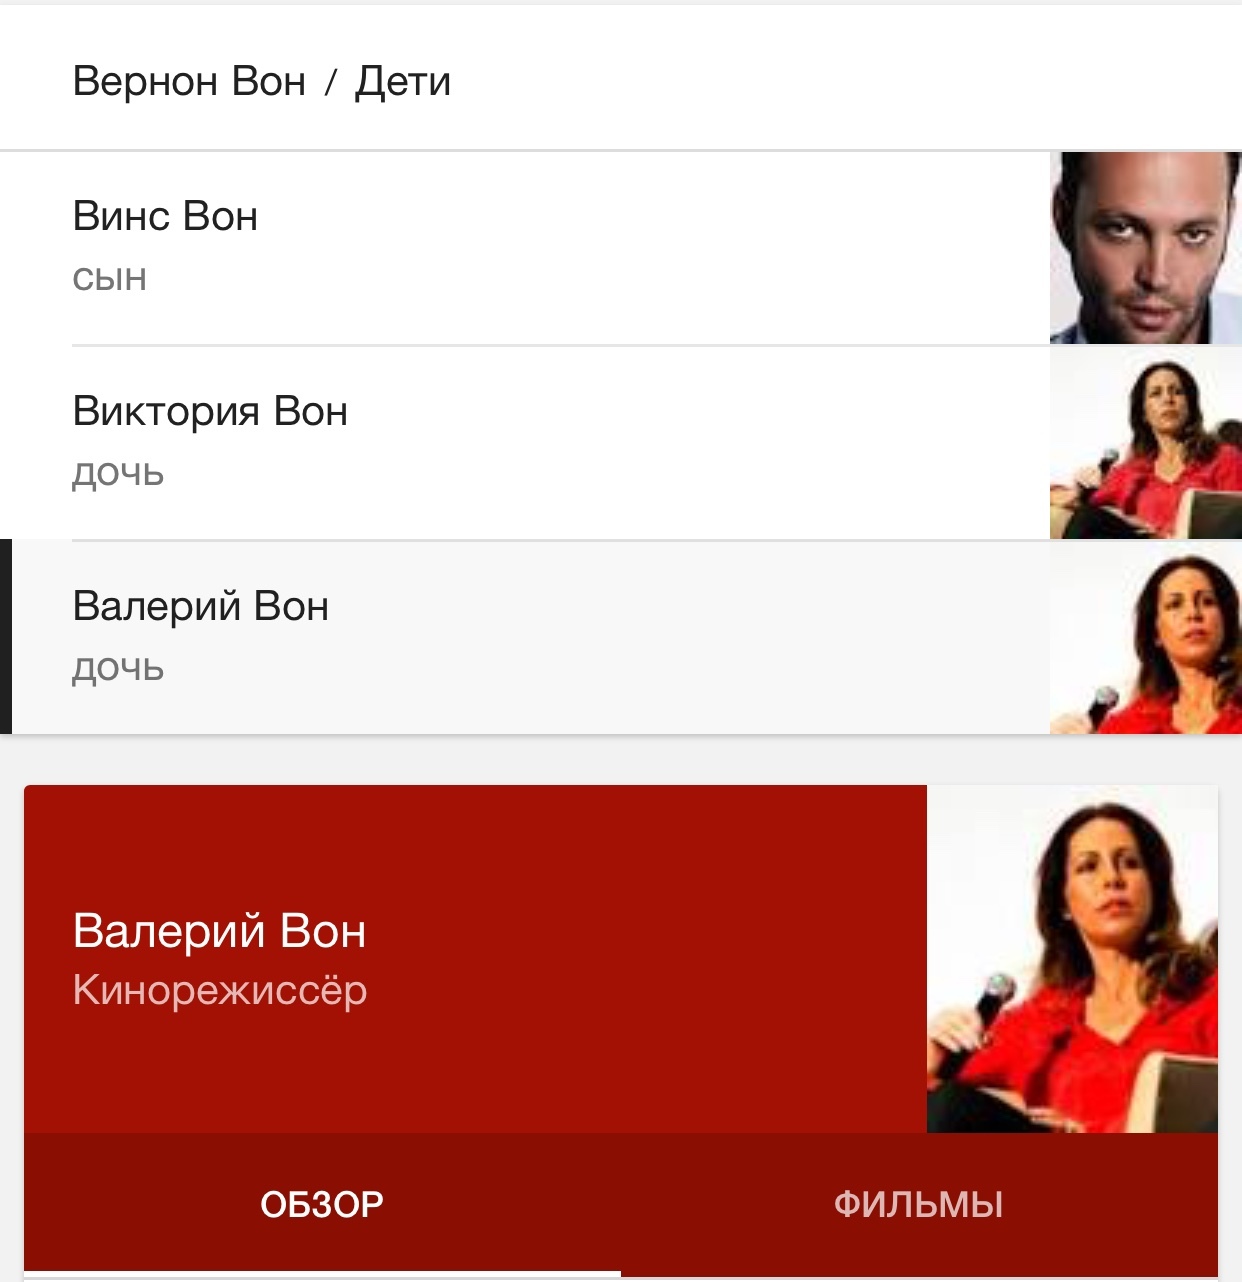 Google, you're drunk, go home - Translation, , Google, Screenshot, Actors and actresses, My